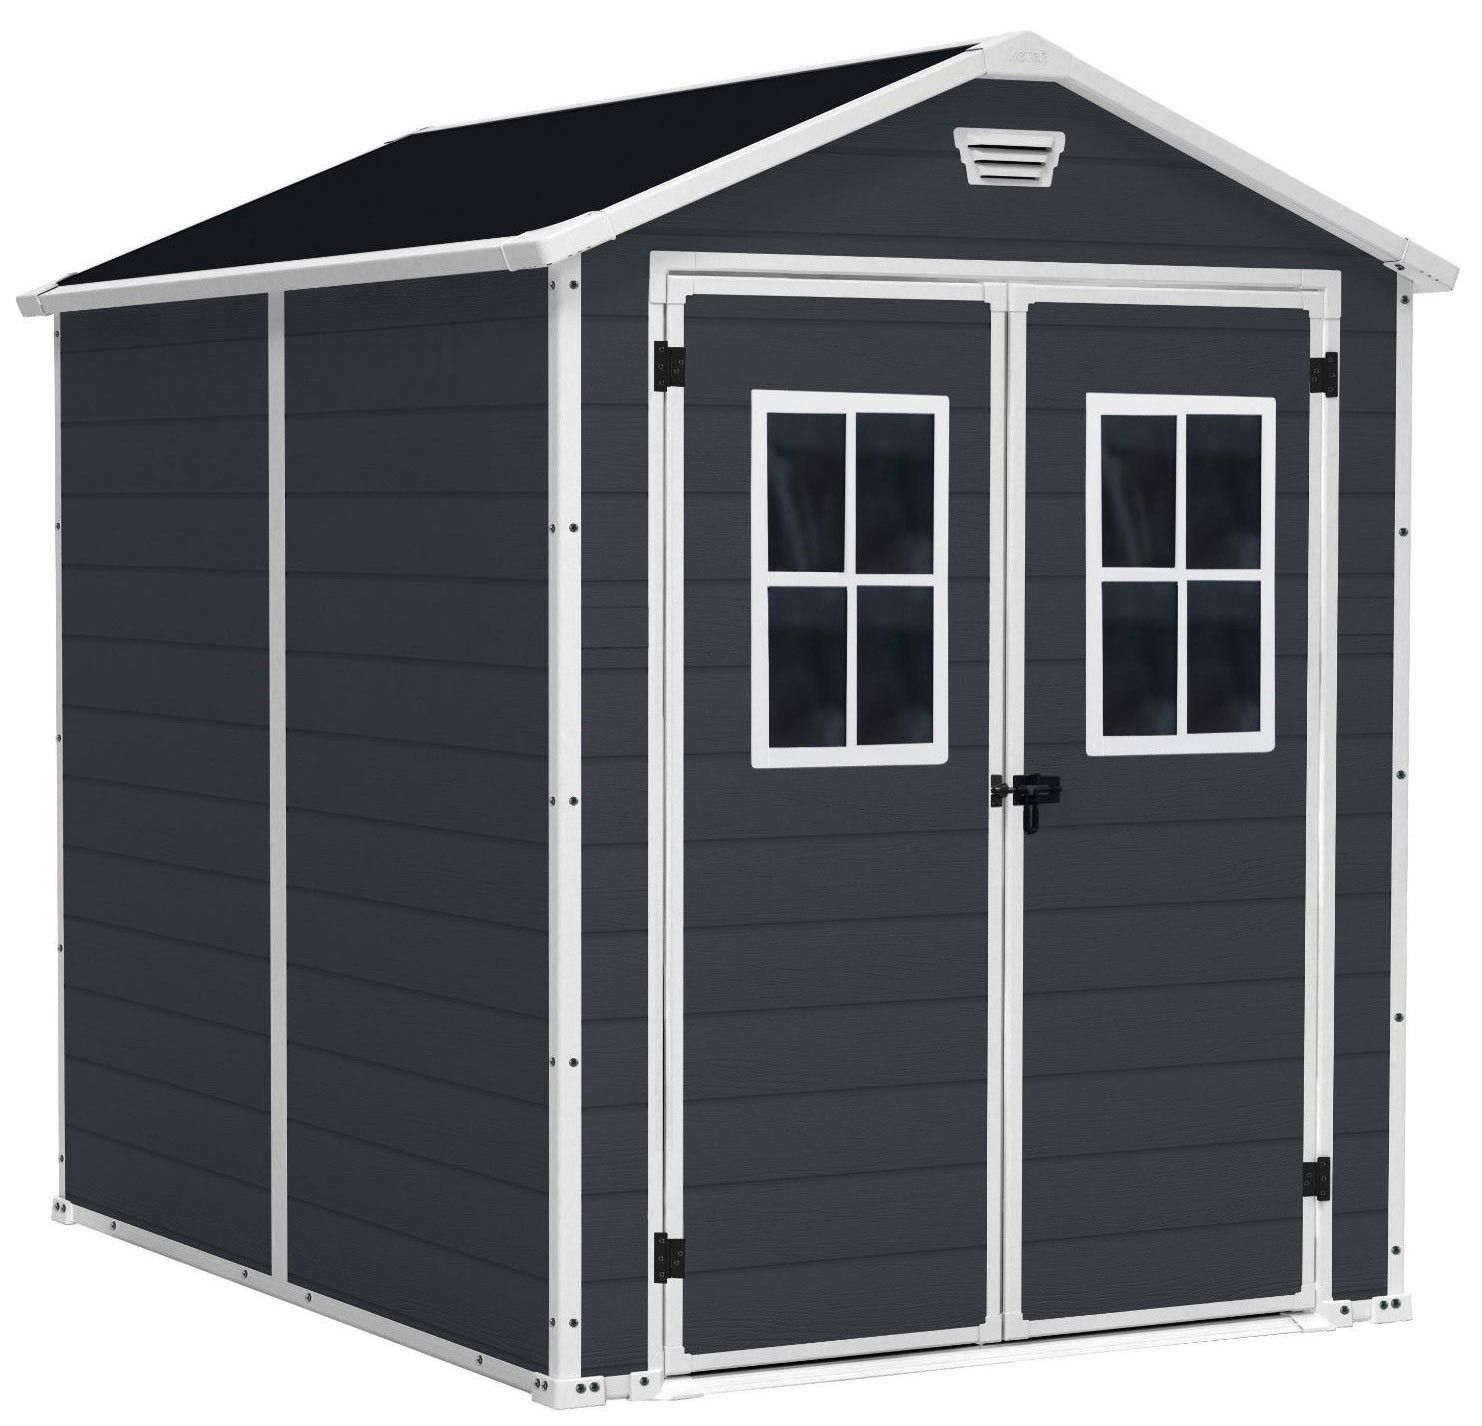 plastic sheds - plastic outdoor storage / keter manor 6 x 8